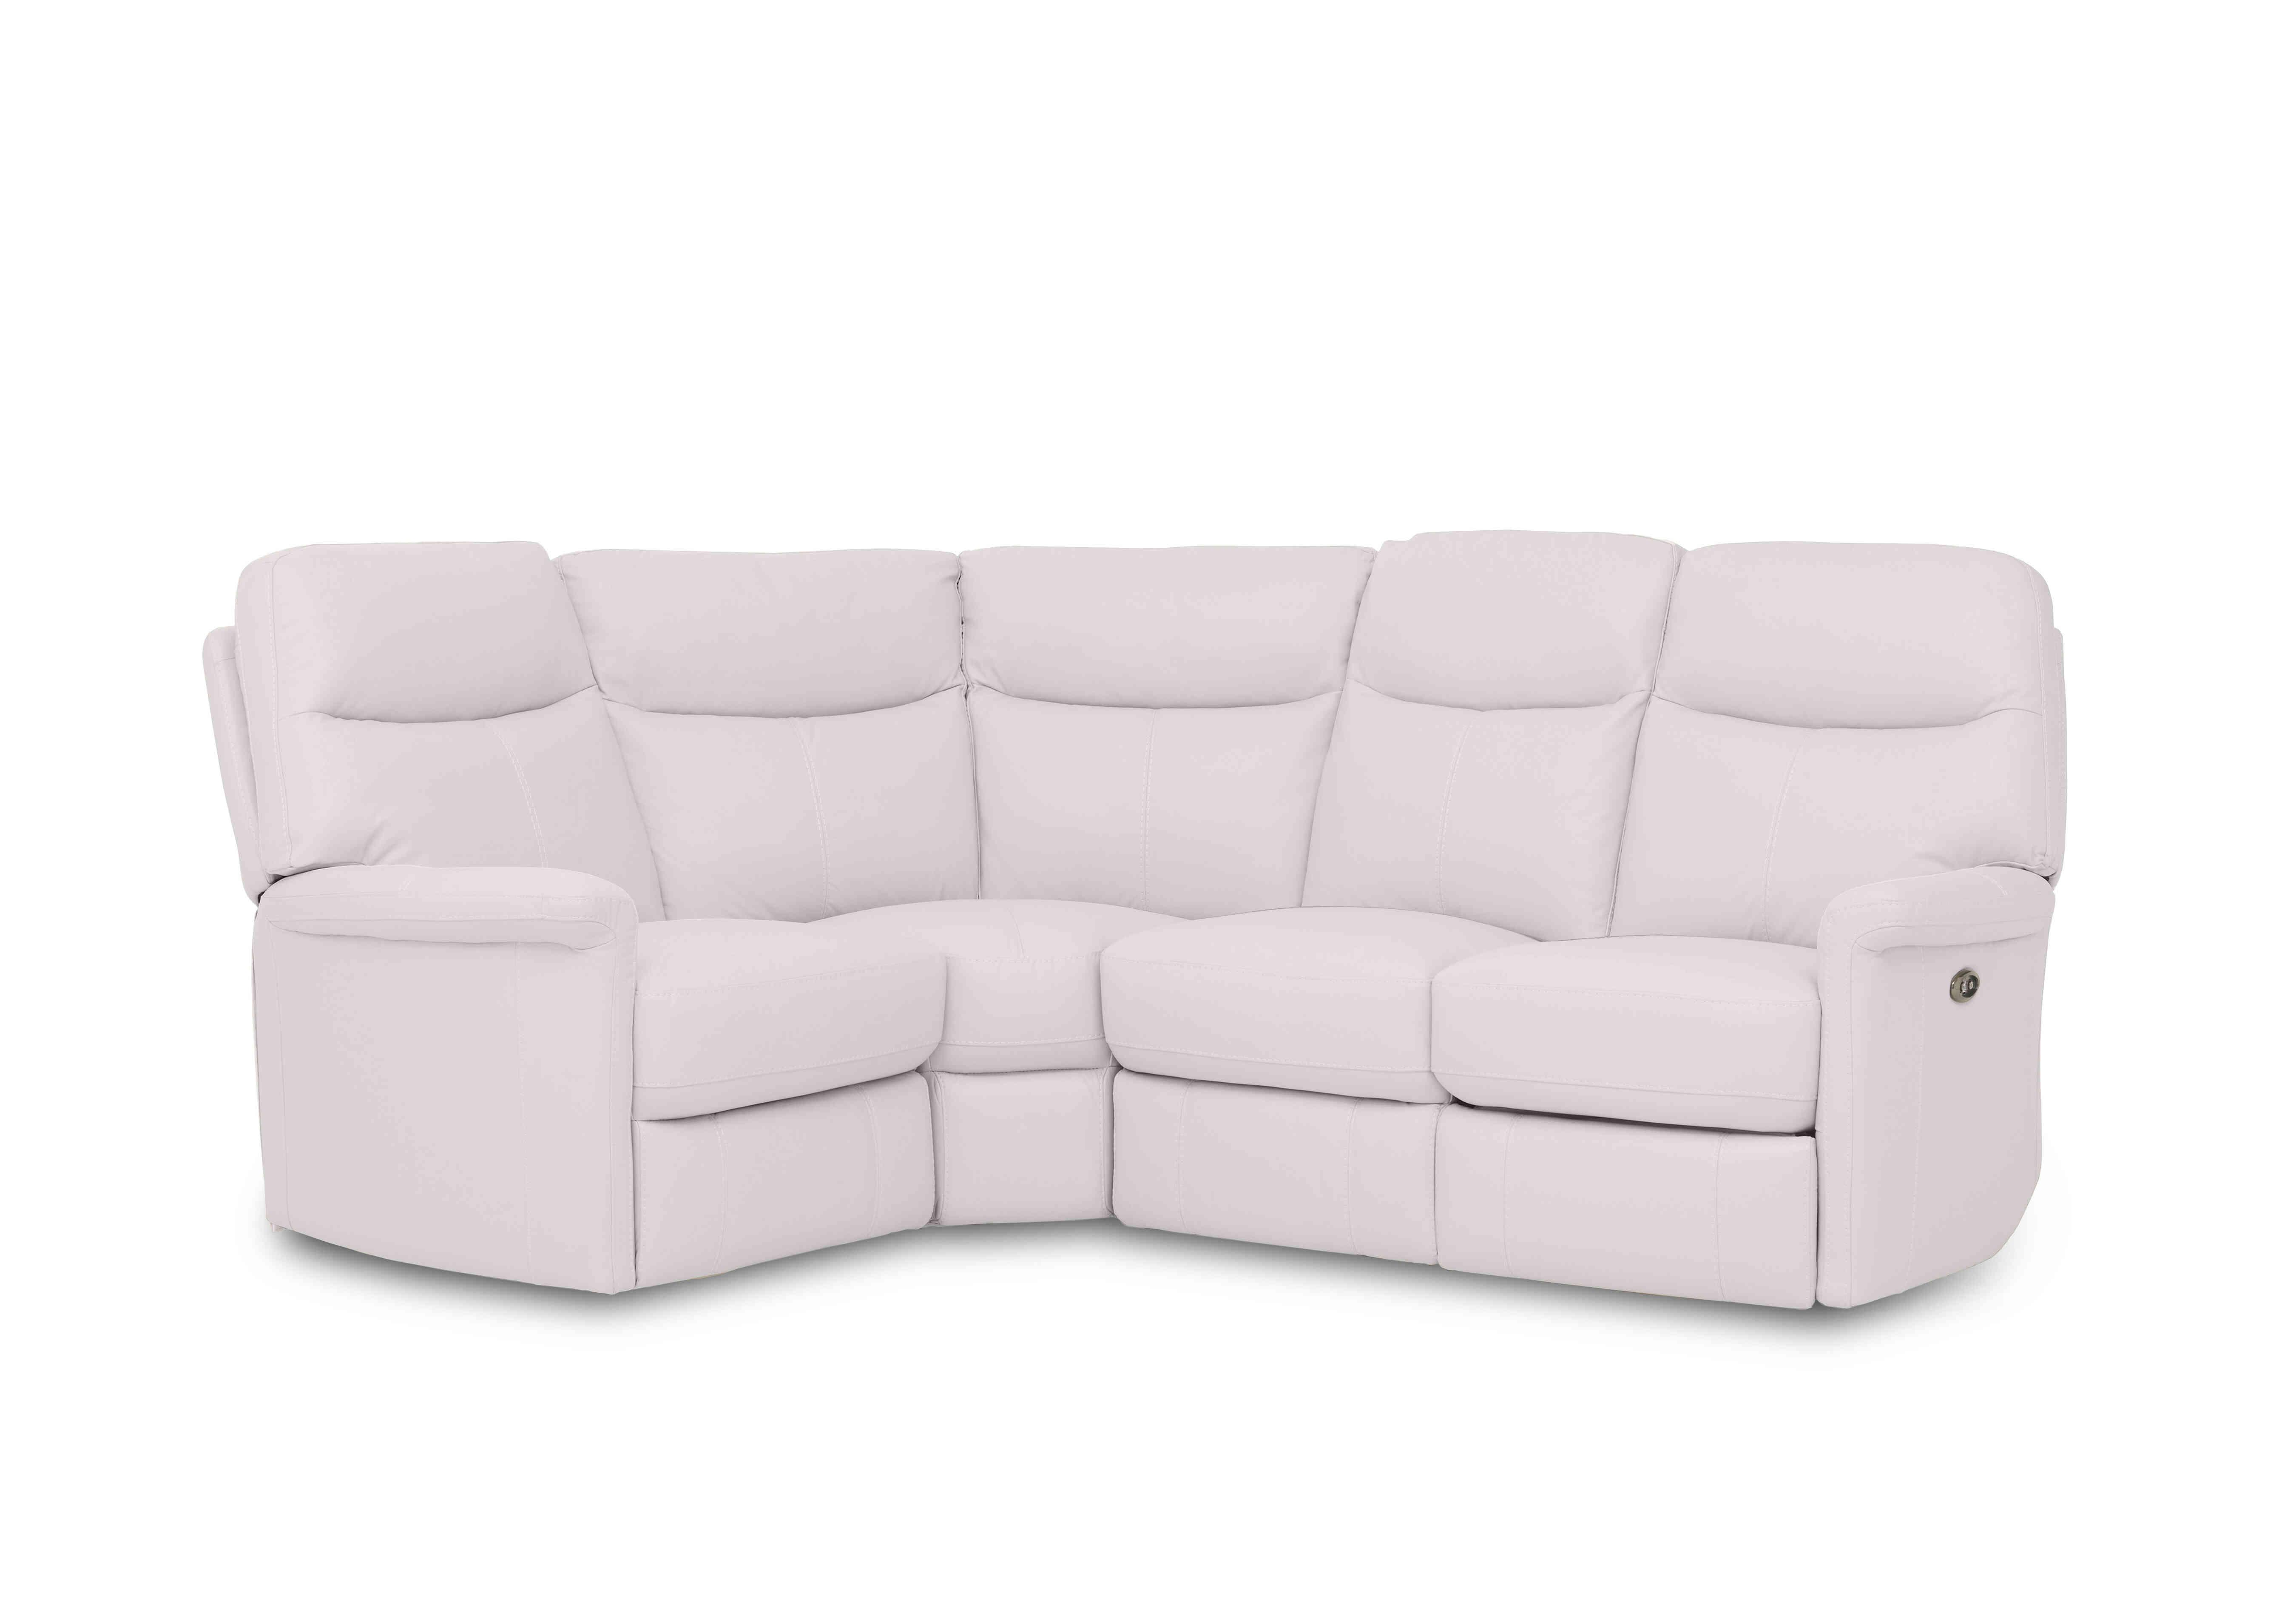 Compact Collection Lille Leather Corner Sofa in Bv-744d Star White on Furniture Village